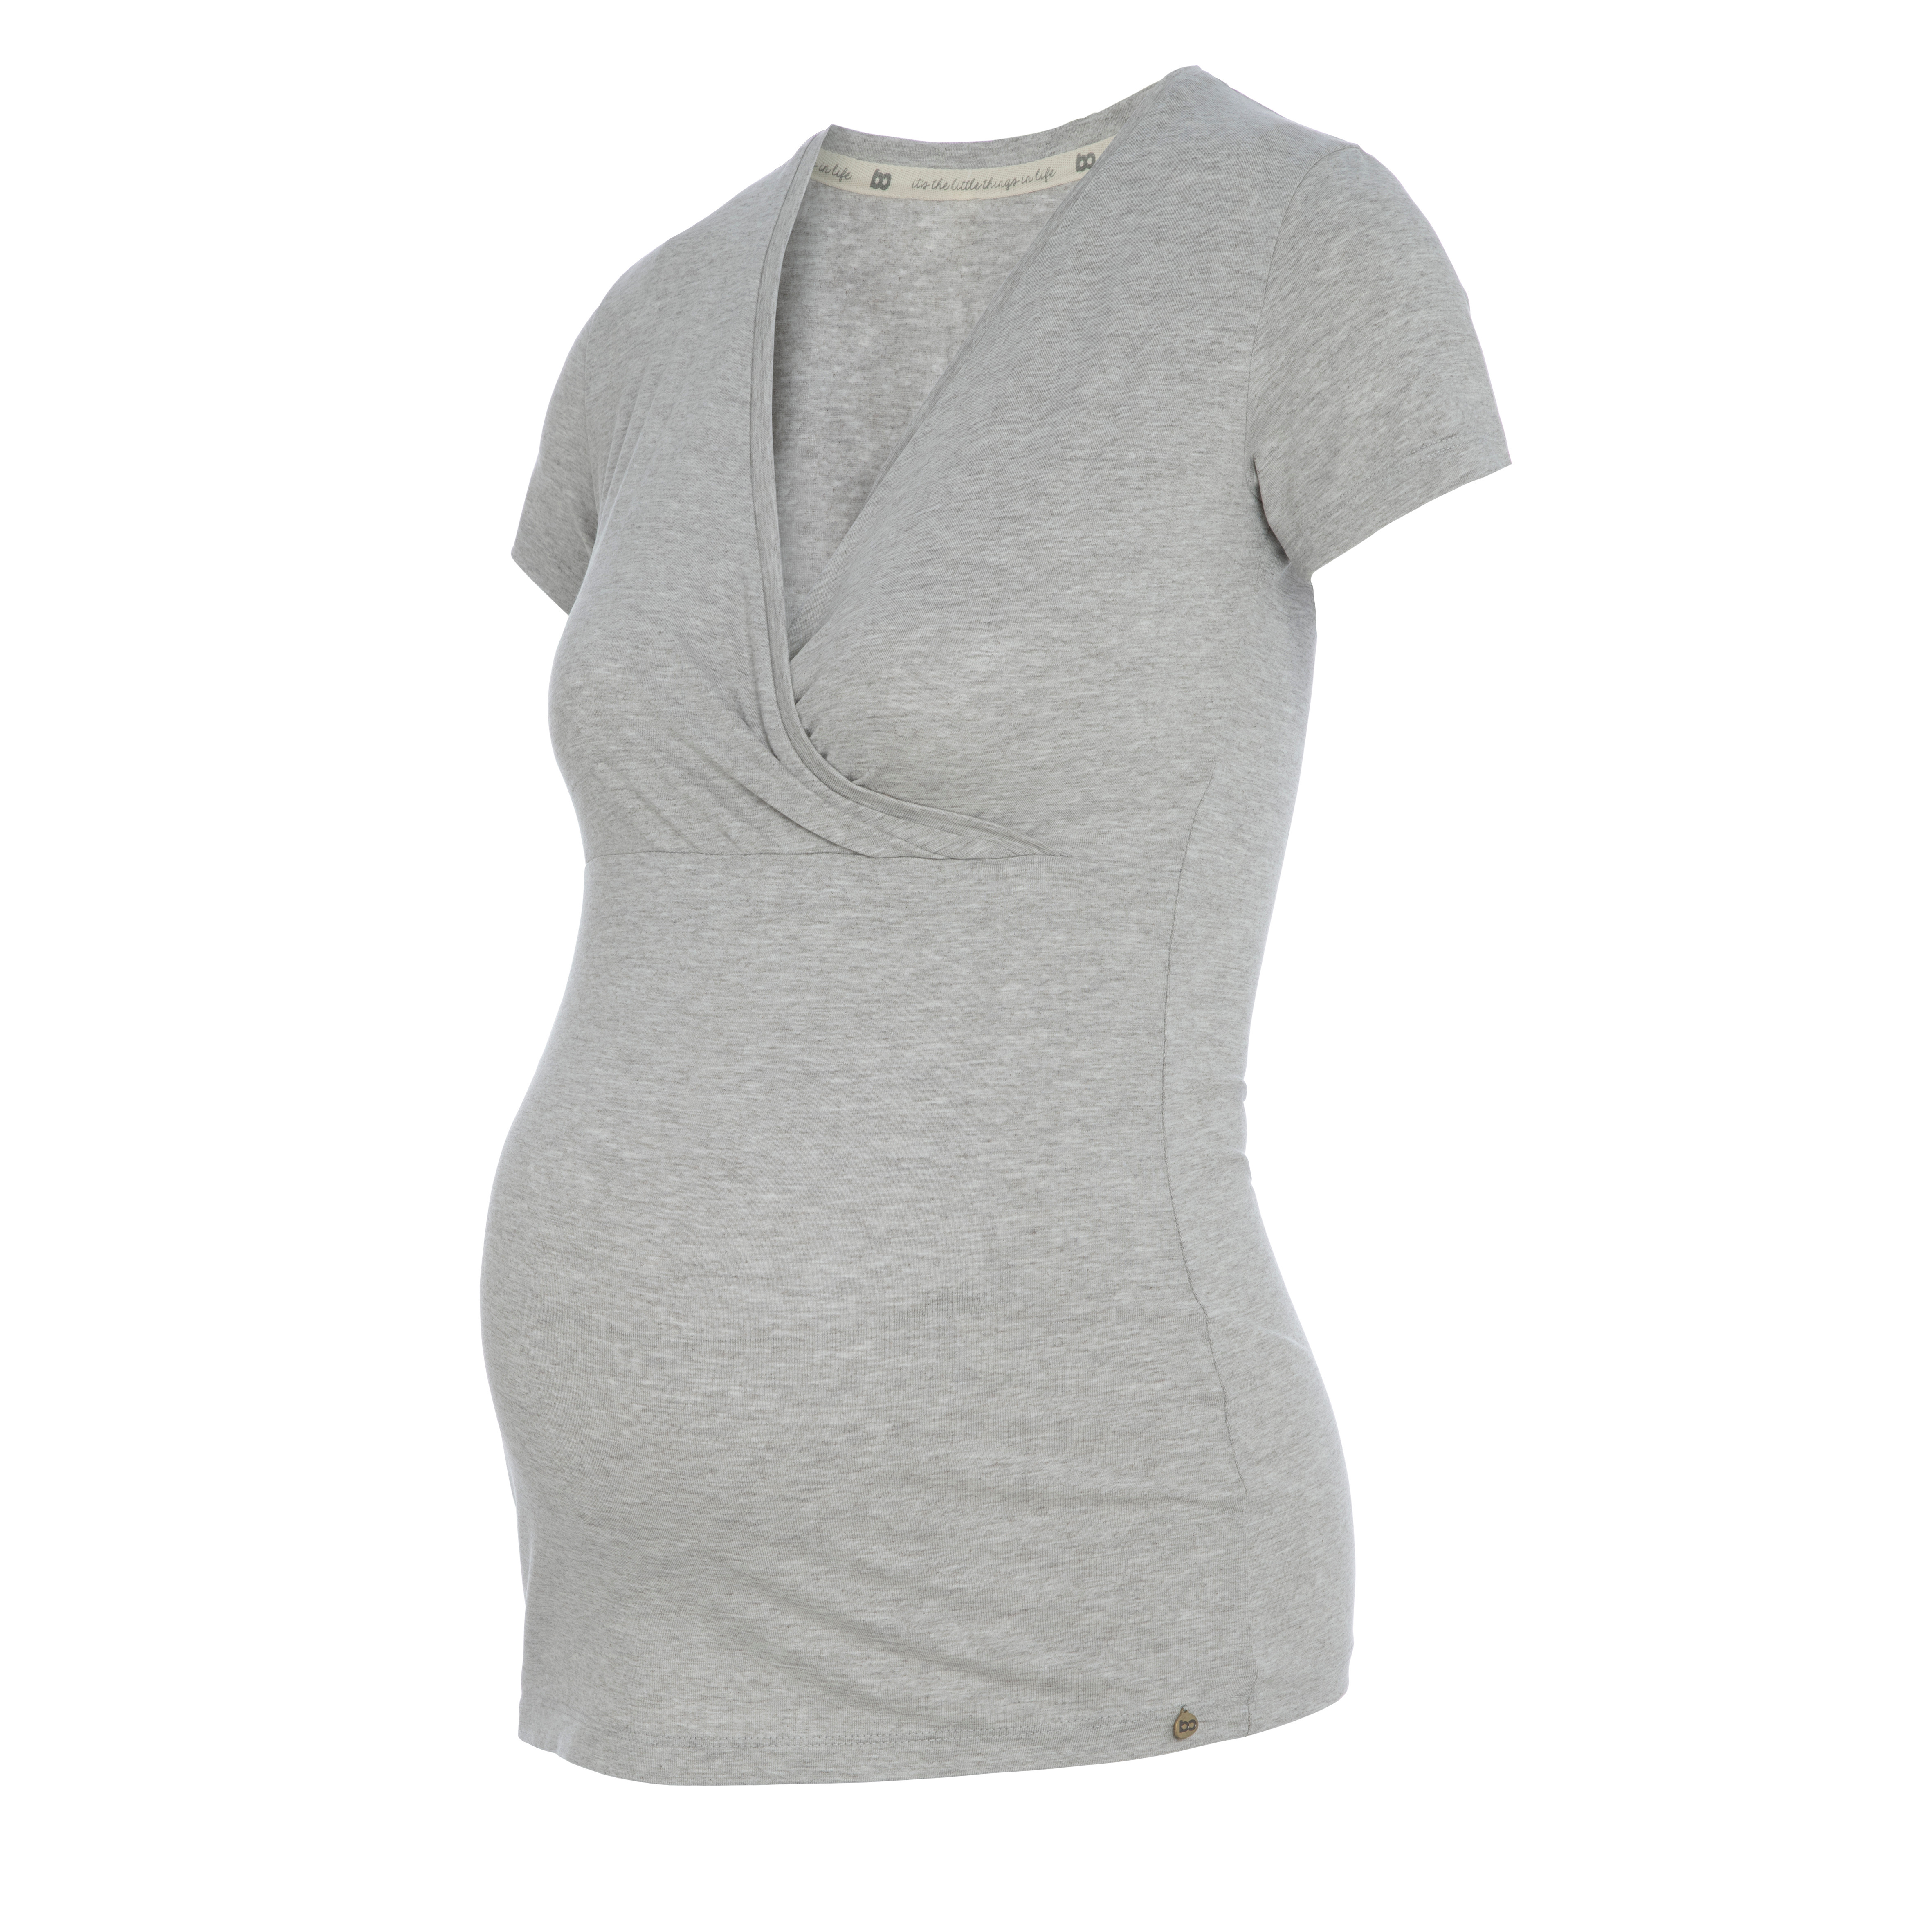 Maternity T-shirt Glow dusty grey - S - With nursing function